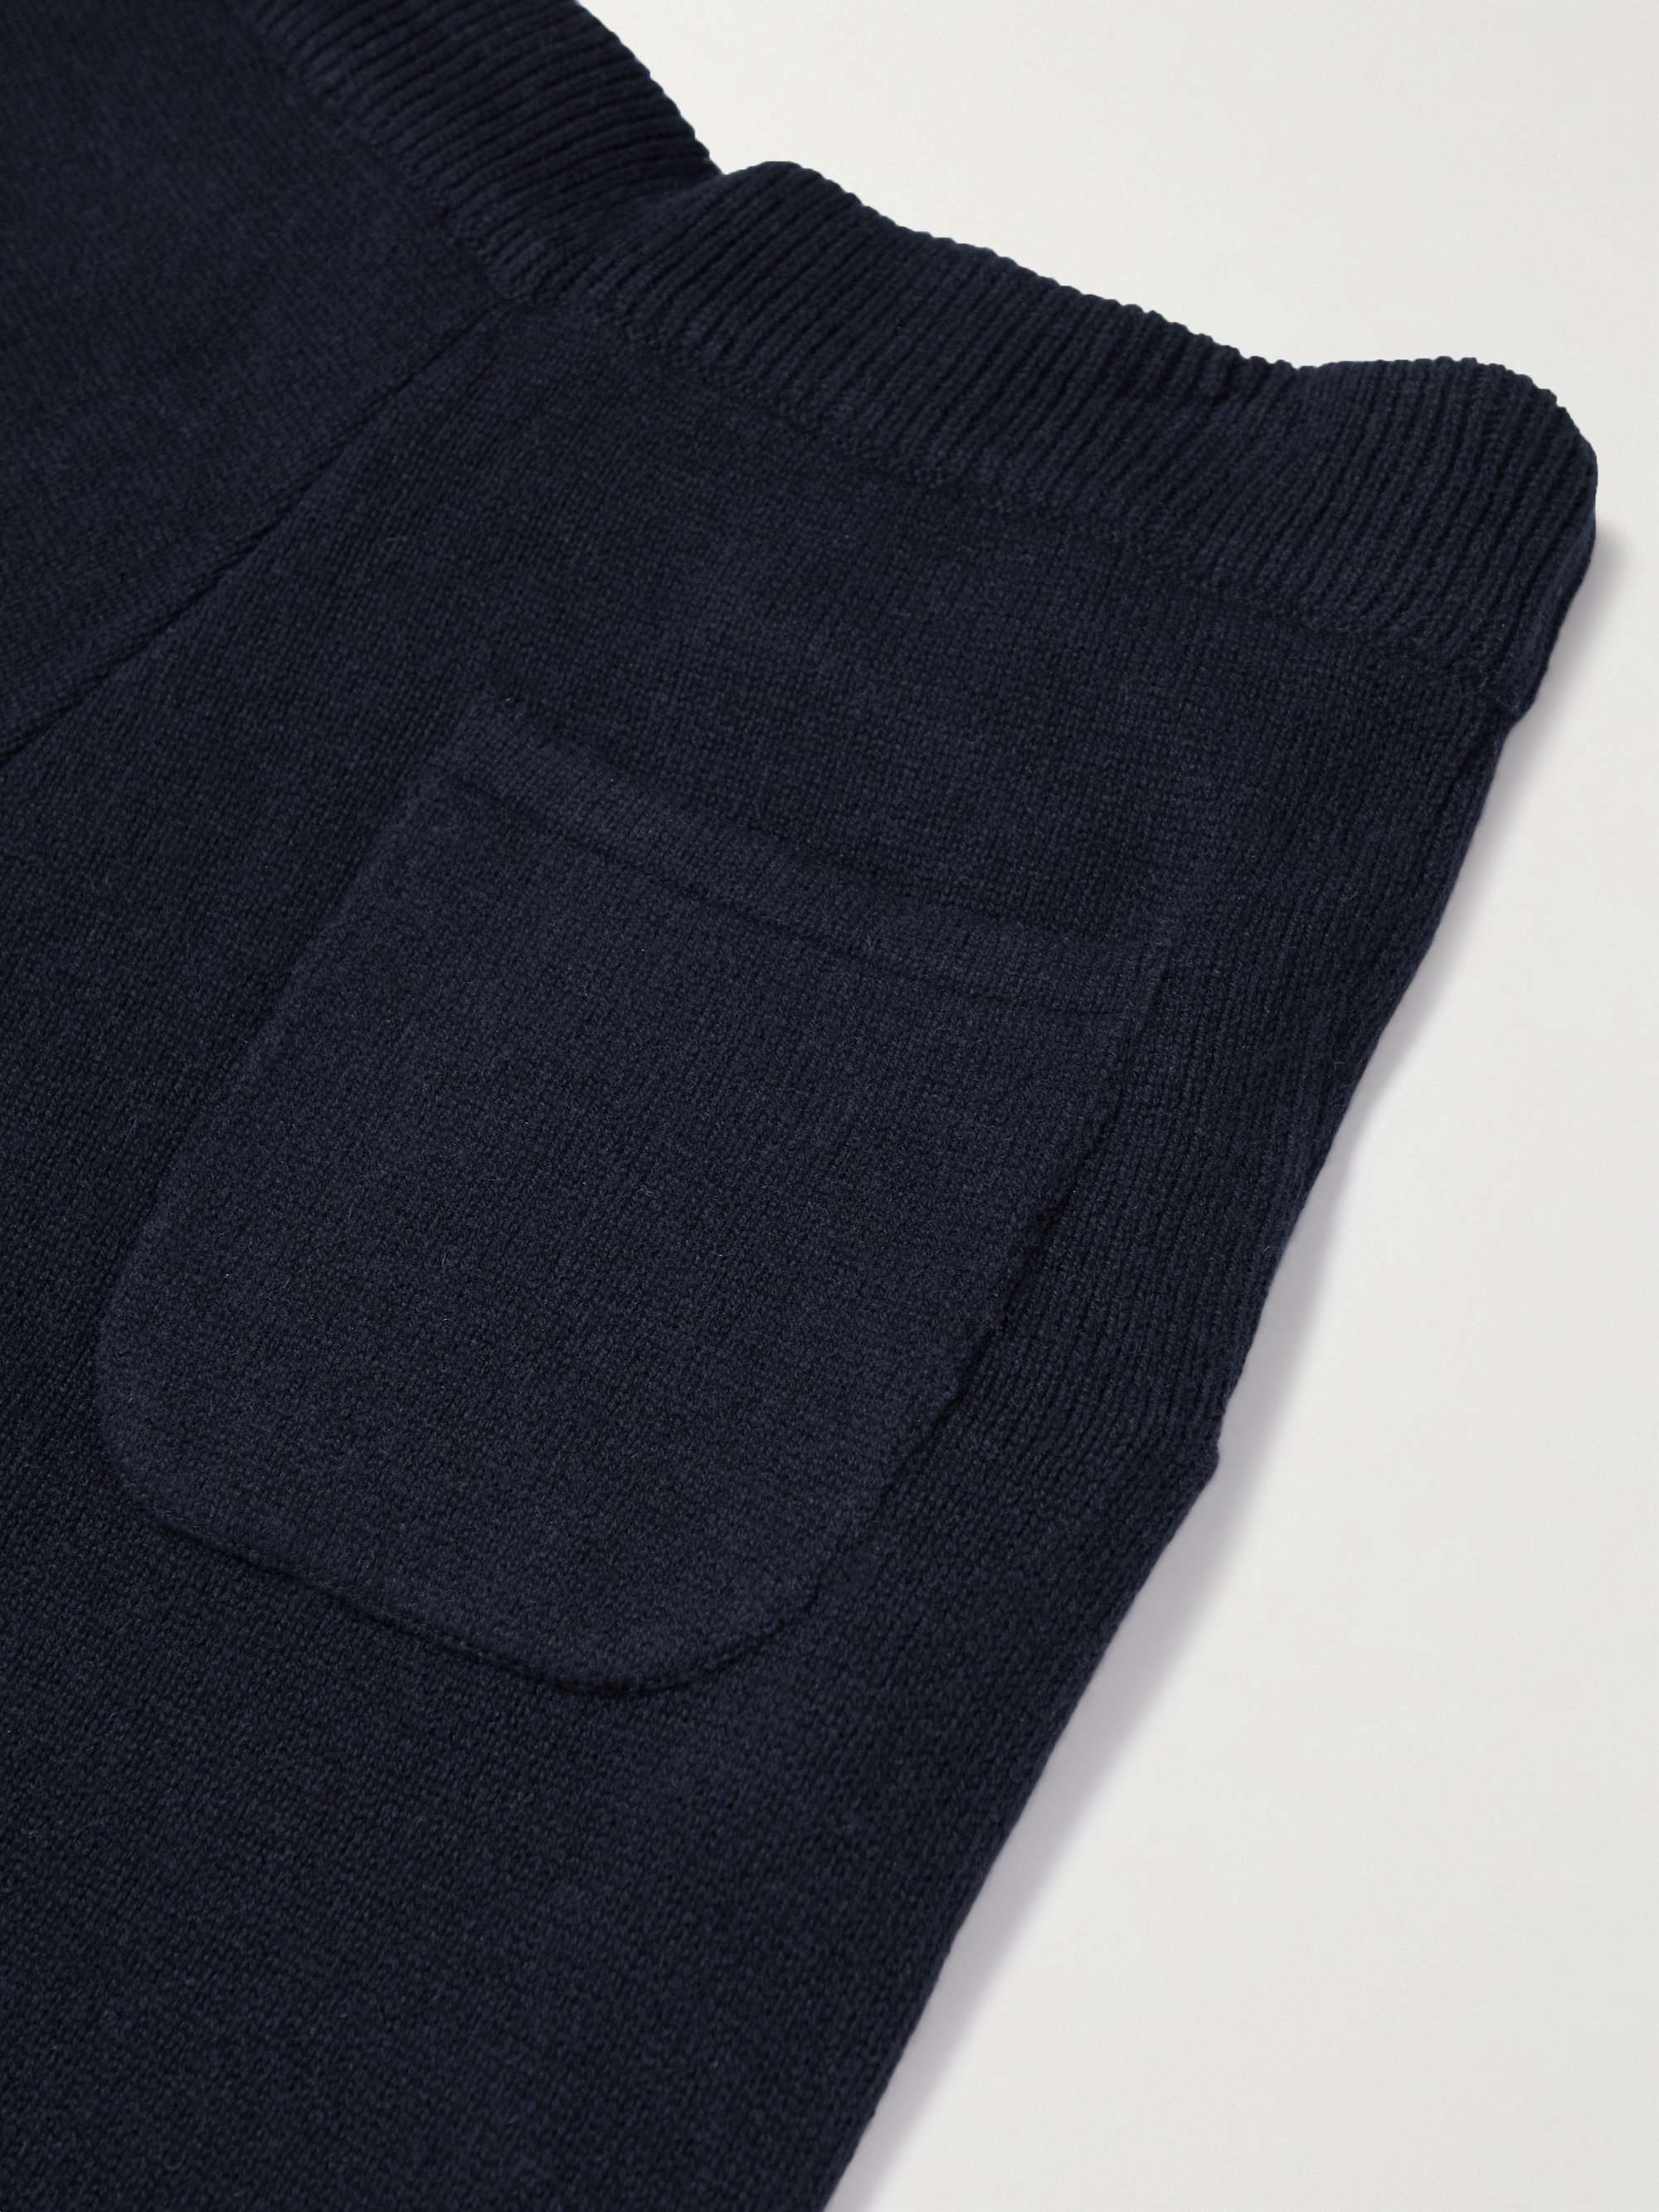 RICHARD JAMES Recycled Cashmere and Wool-Blend Sweatpants